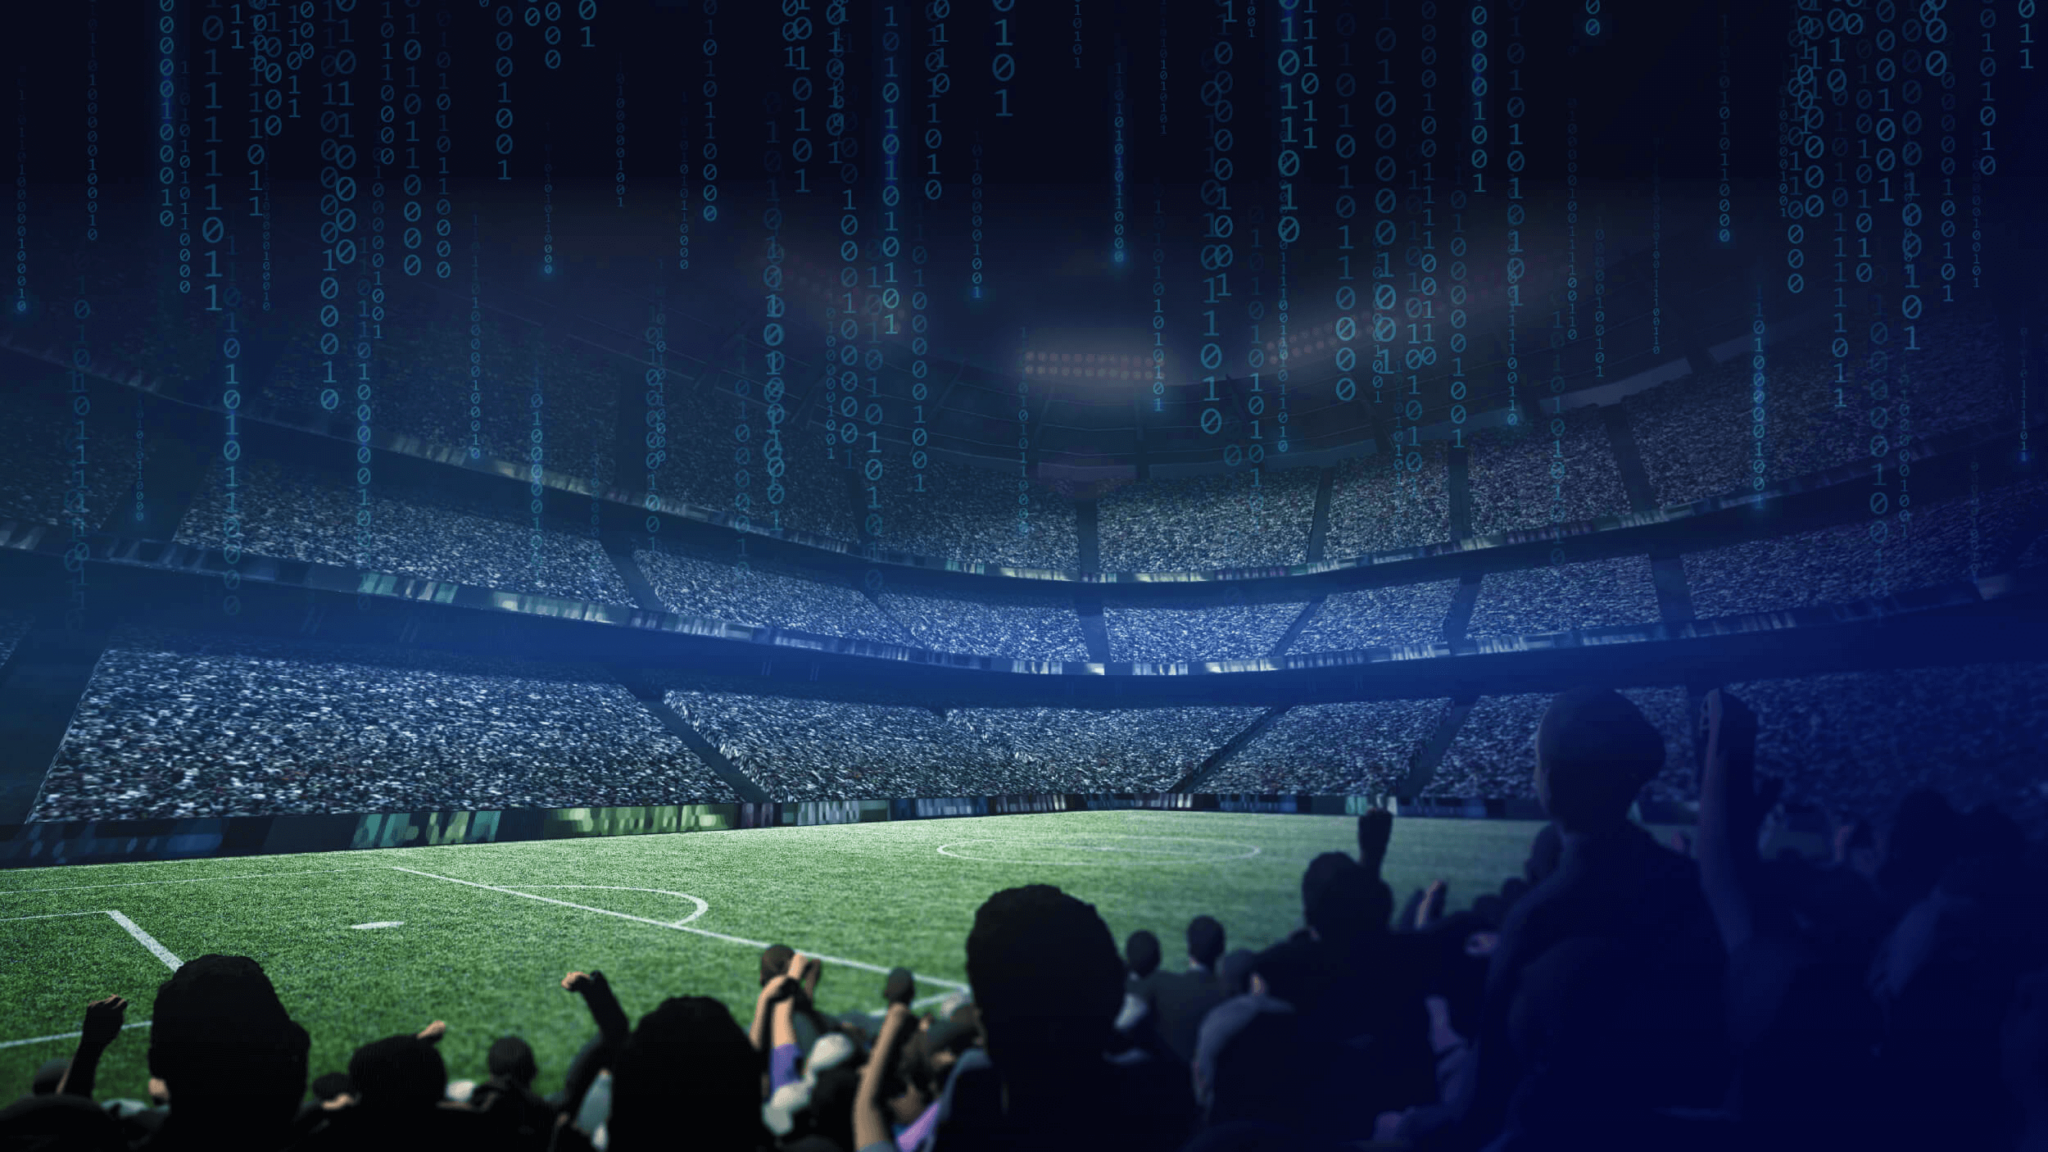 Global sport and cyber threats